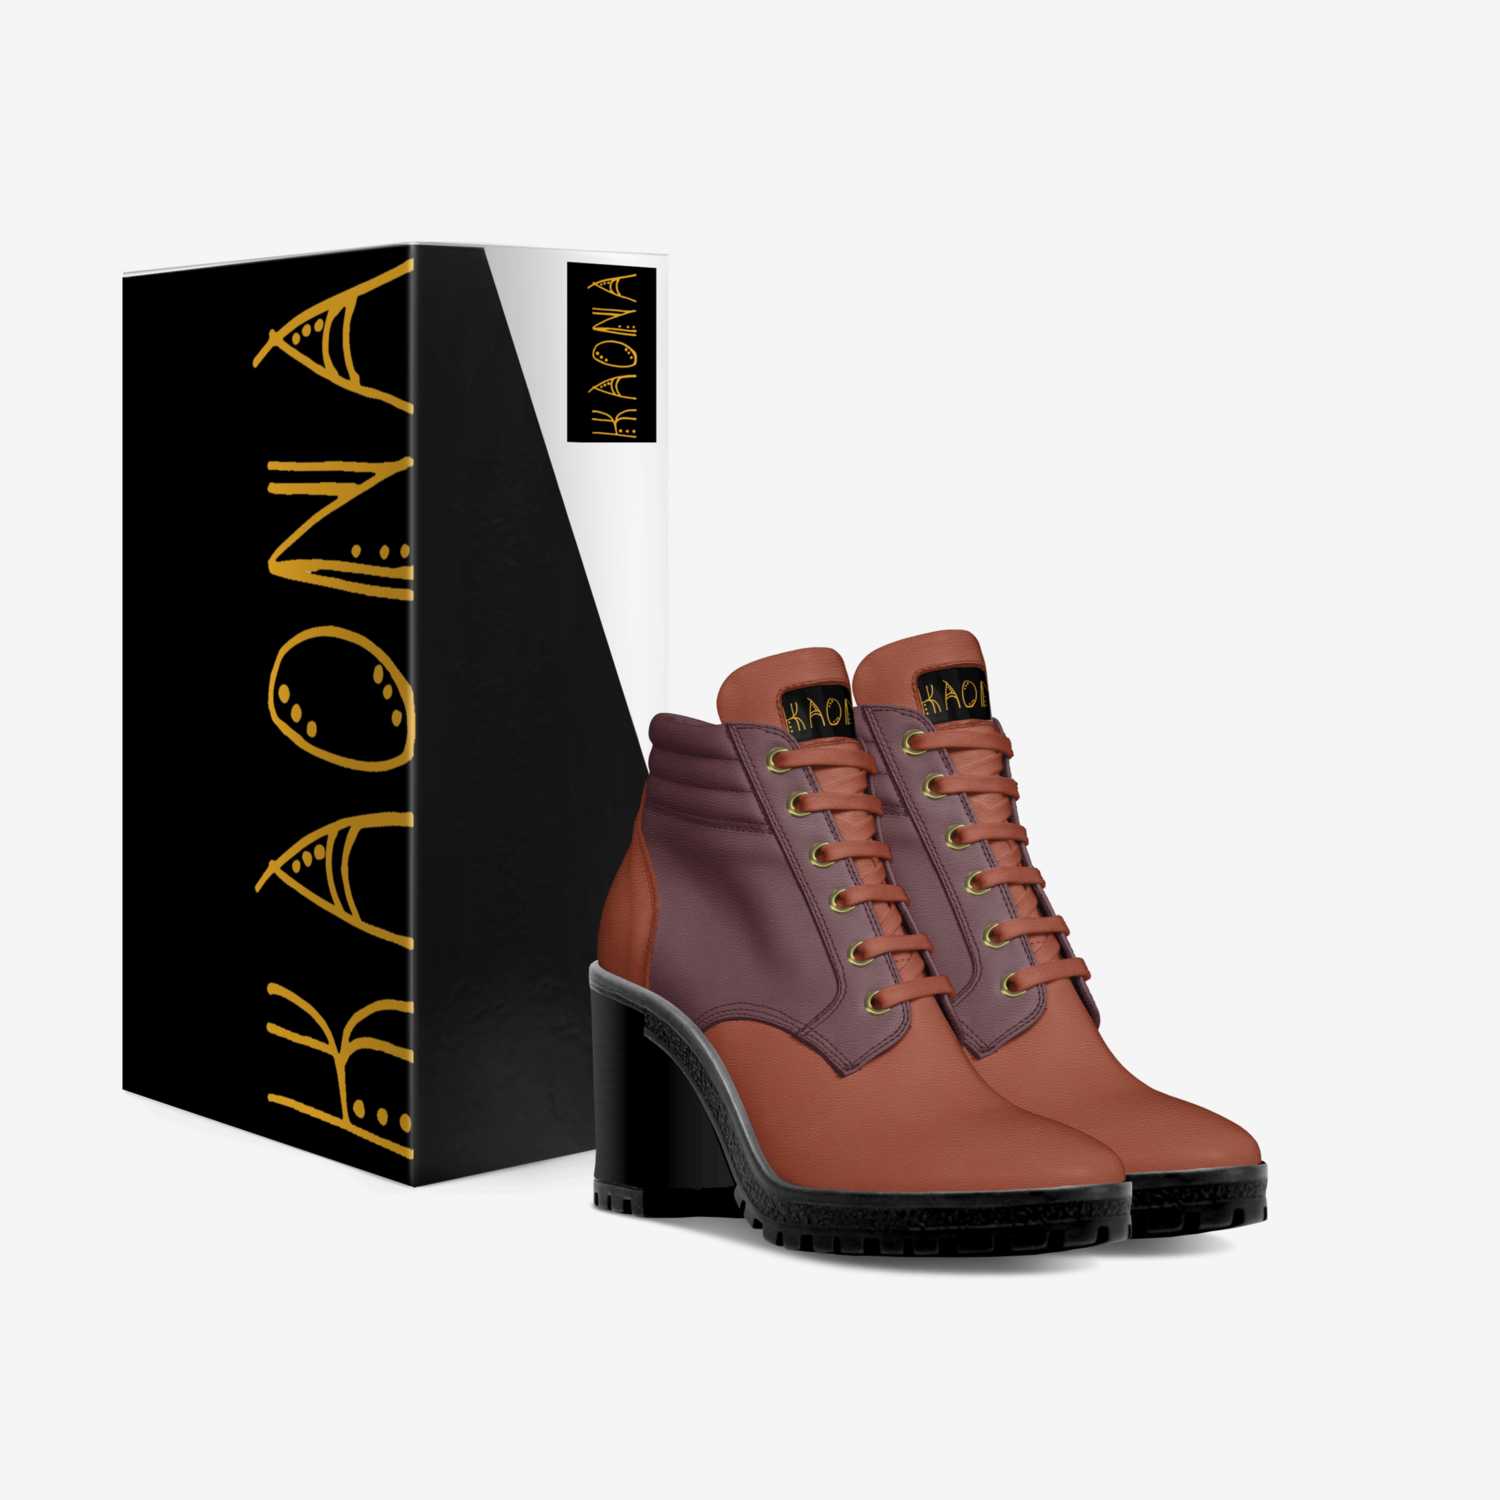 Tawny custom made in Italy shoes by Dominique Karaya | Box view